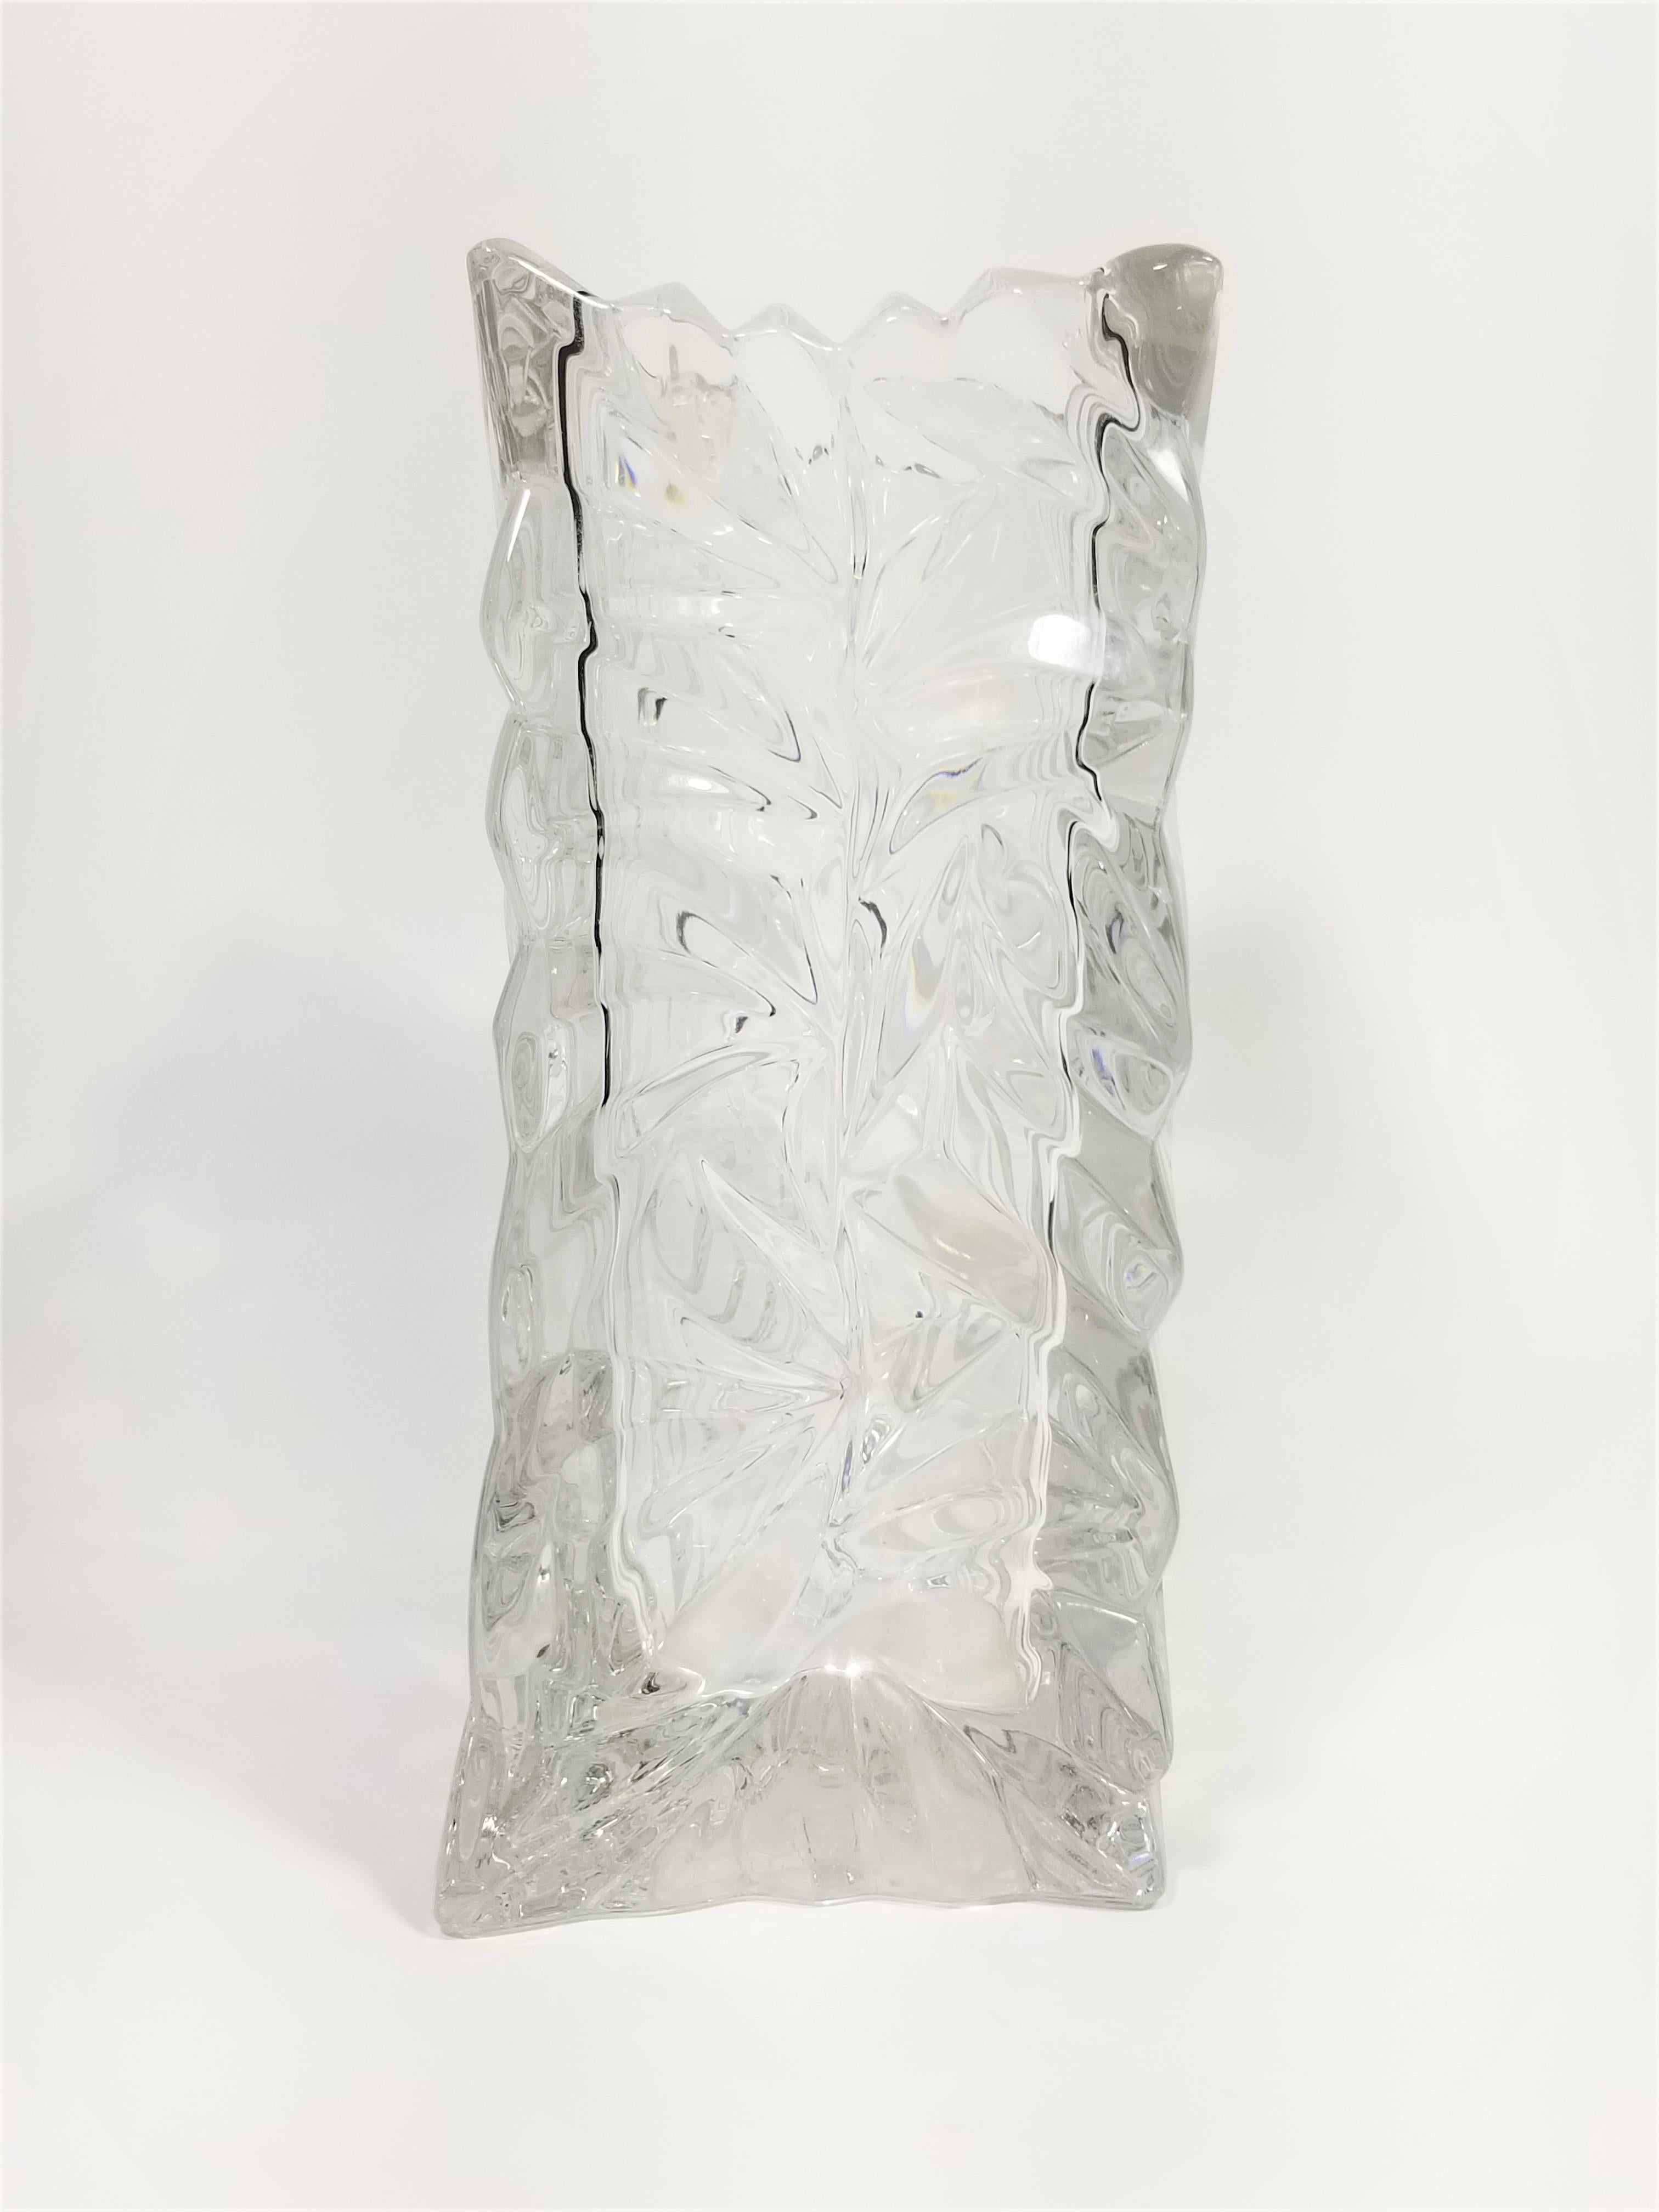 Rosenthal Crystal Vase Brutalist Design Made in Germany In Excellent Condition For Sale In New York, NY